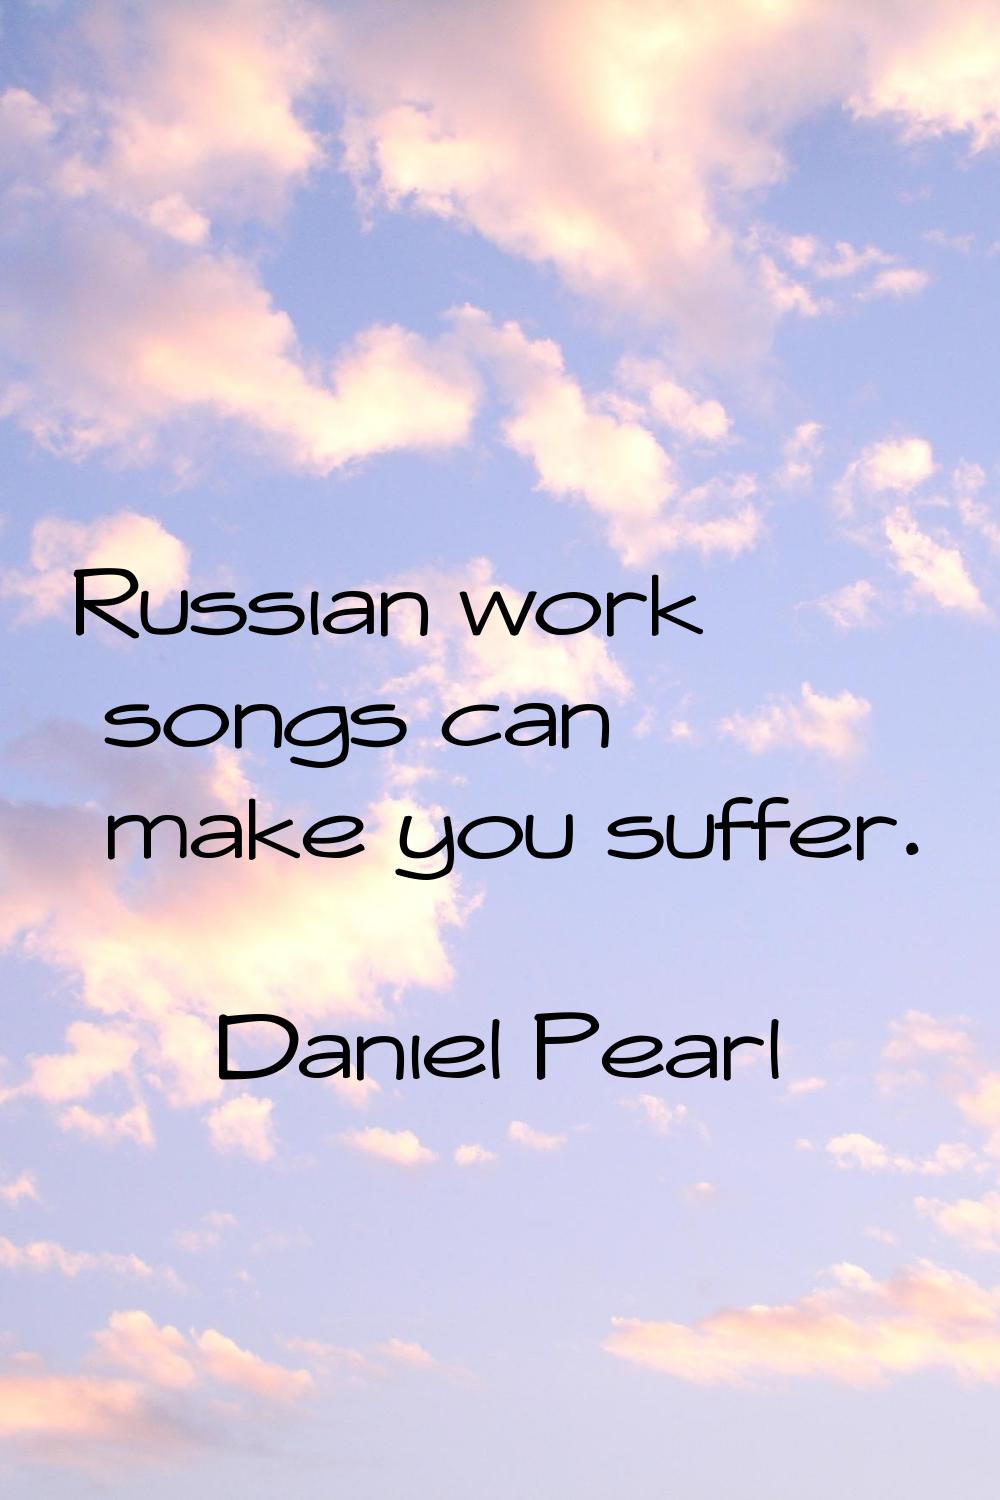 Russian work songs can make you suffer.